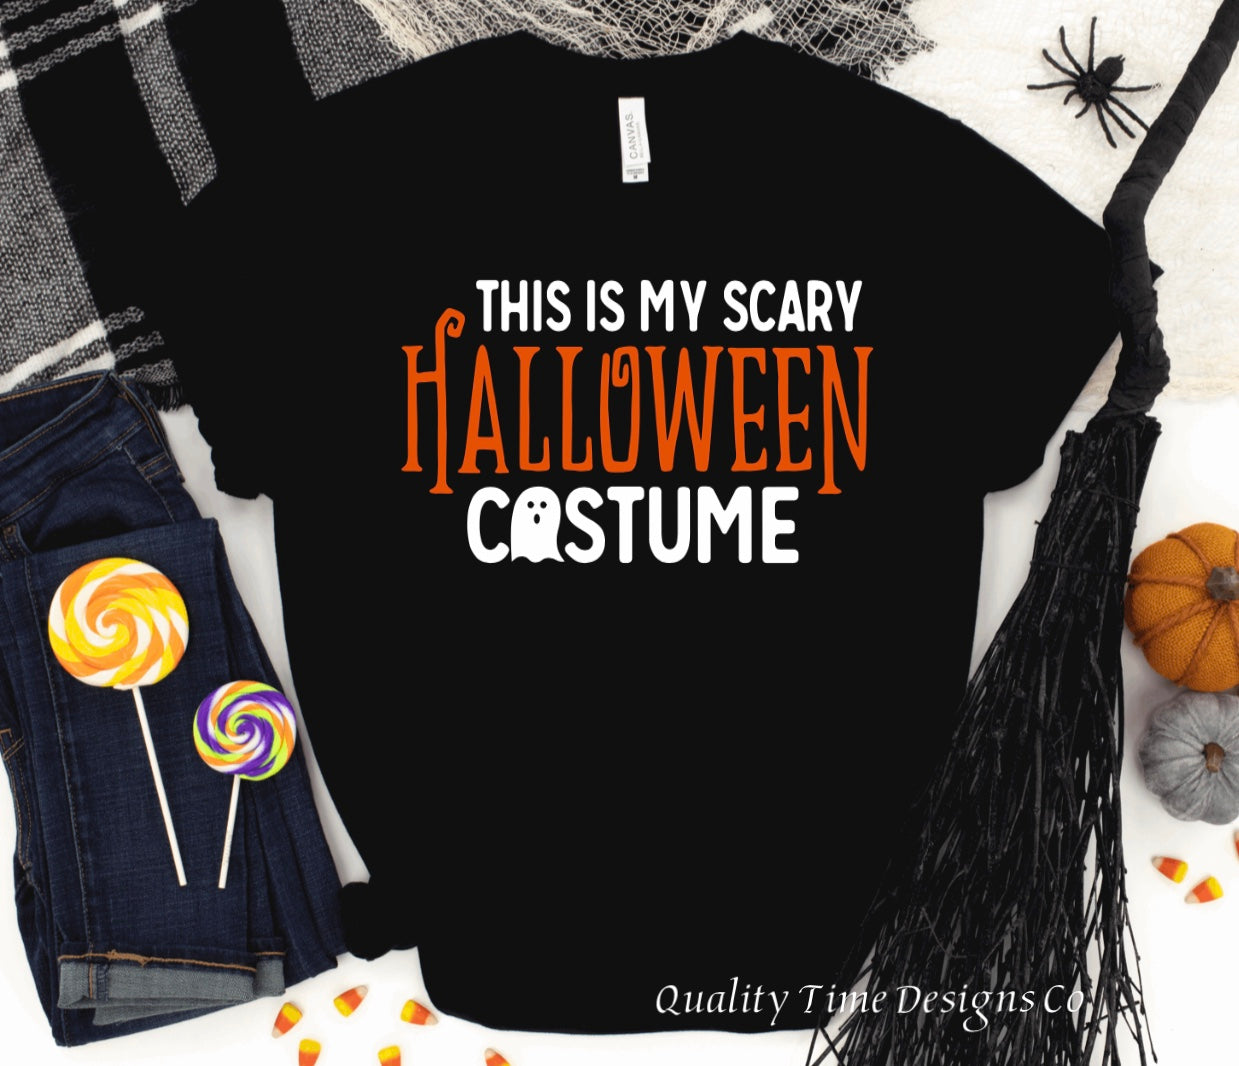 This is My scary Halloween costume t-shirt 